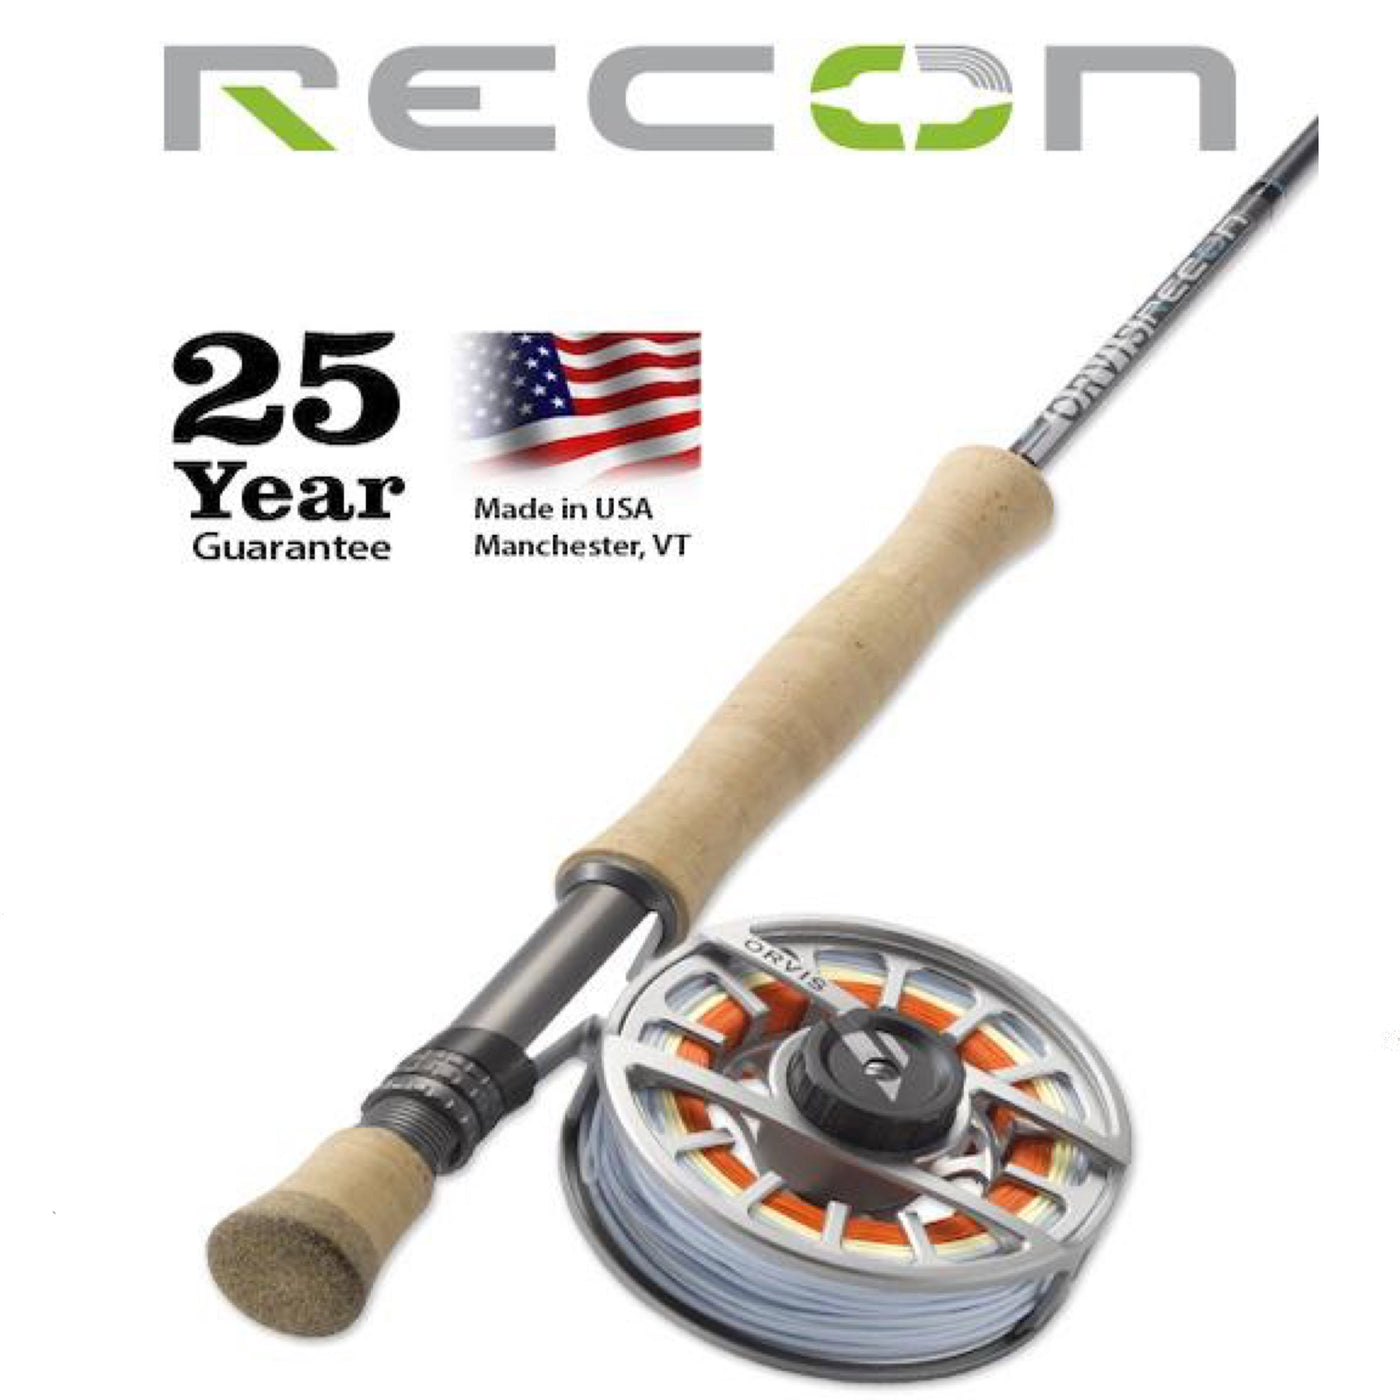 Fly Fishing Rods and Reels, Fly Fishing Outfits